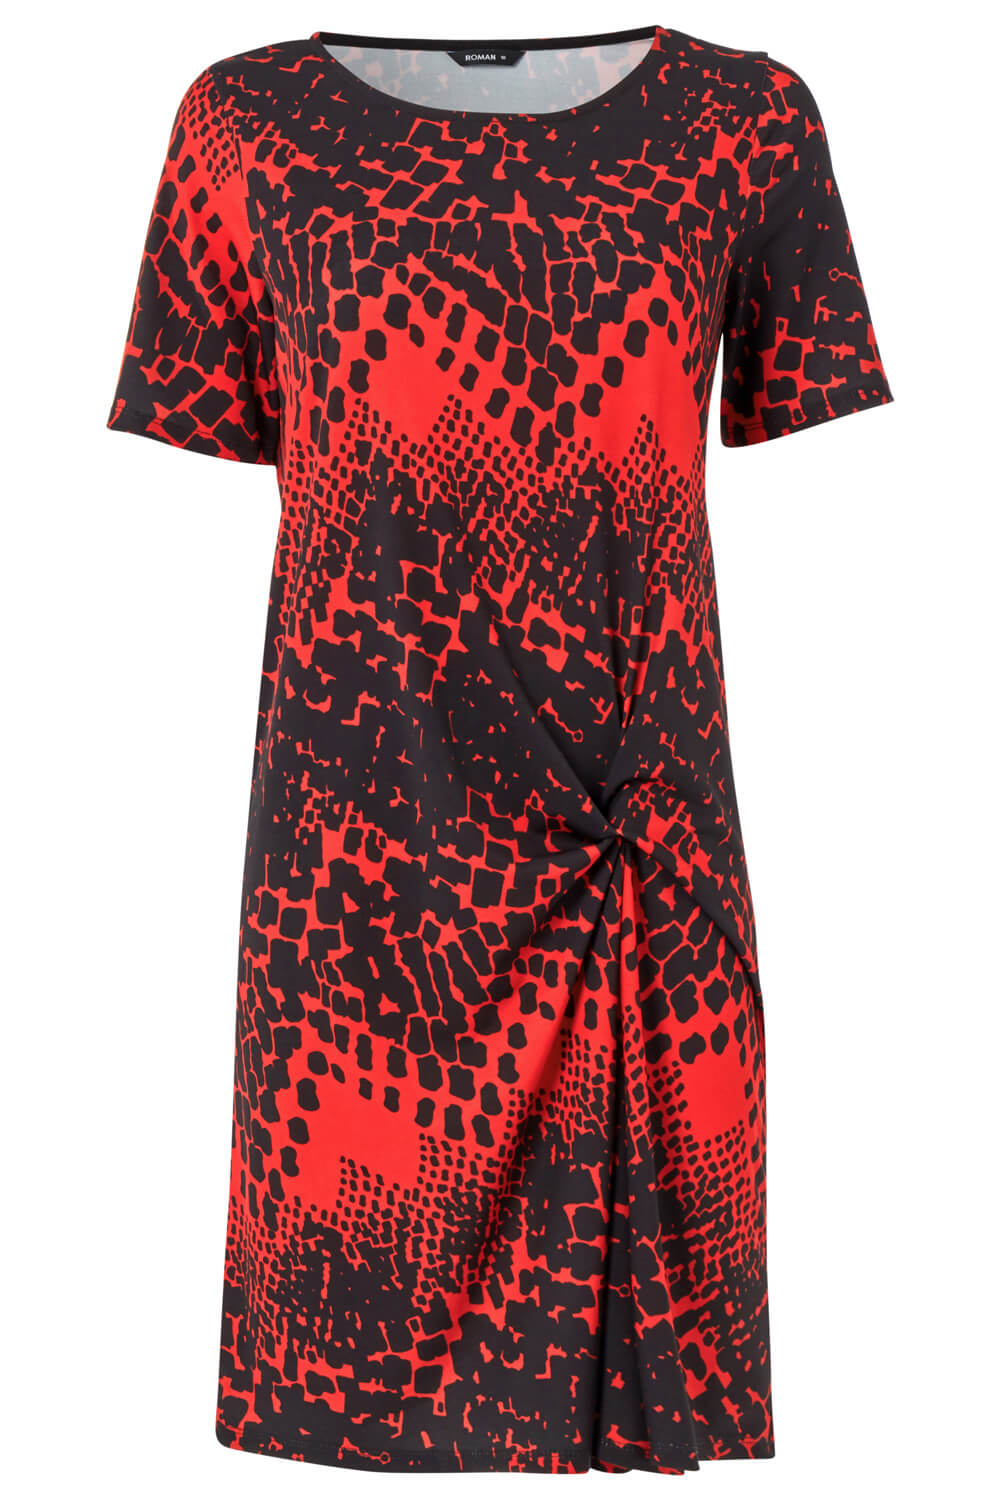 Red Abstract Print Side Twist Shift Dress, Image 5 of 5